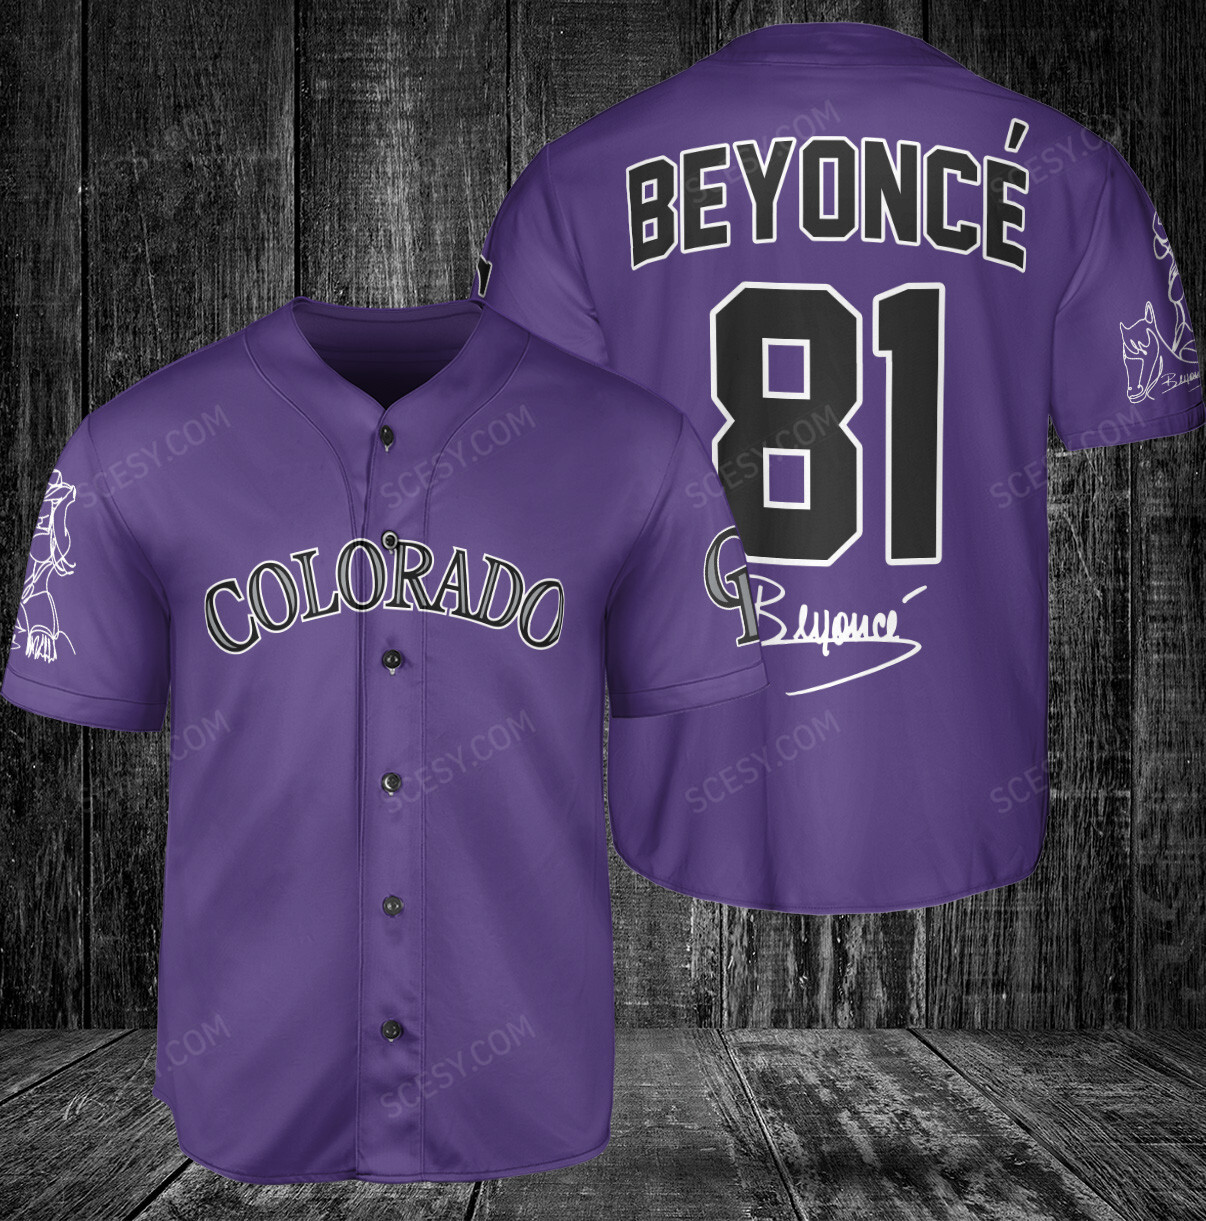 Get Your White Tampa Bay Rays Beyonce Jersey - Home Replica - Scesy